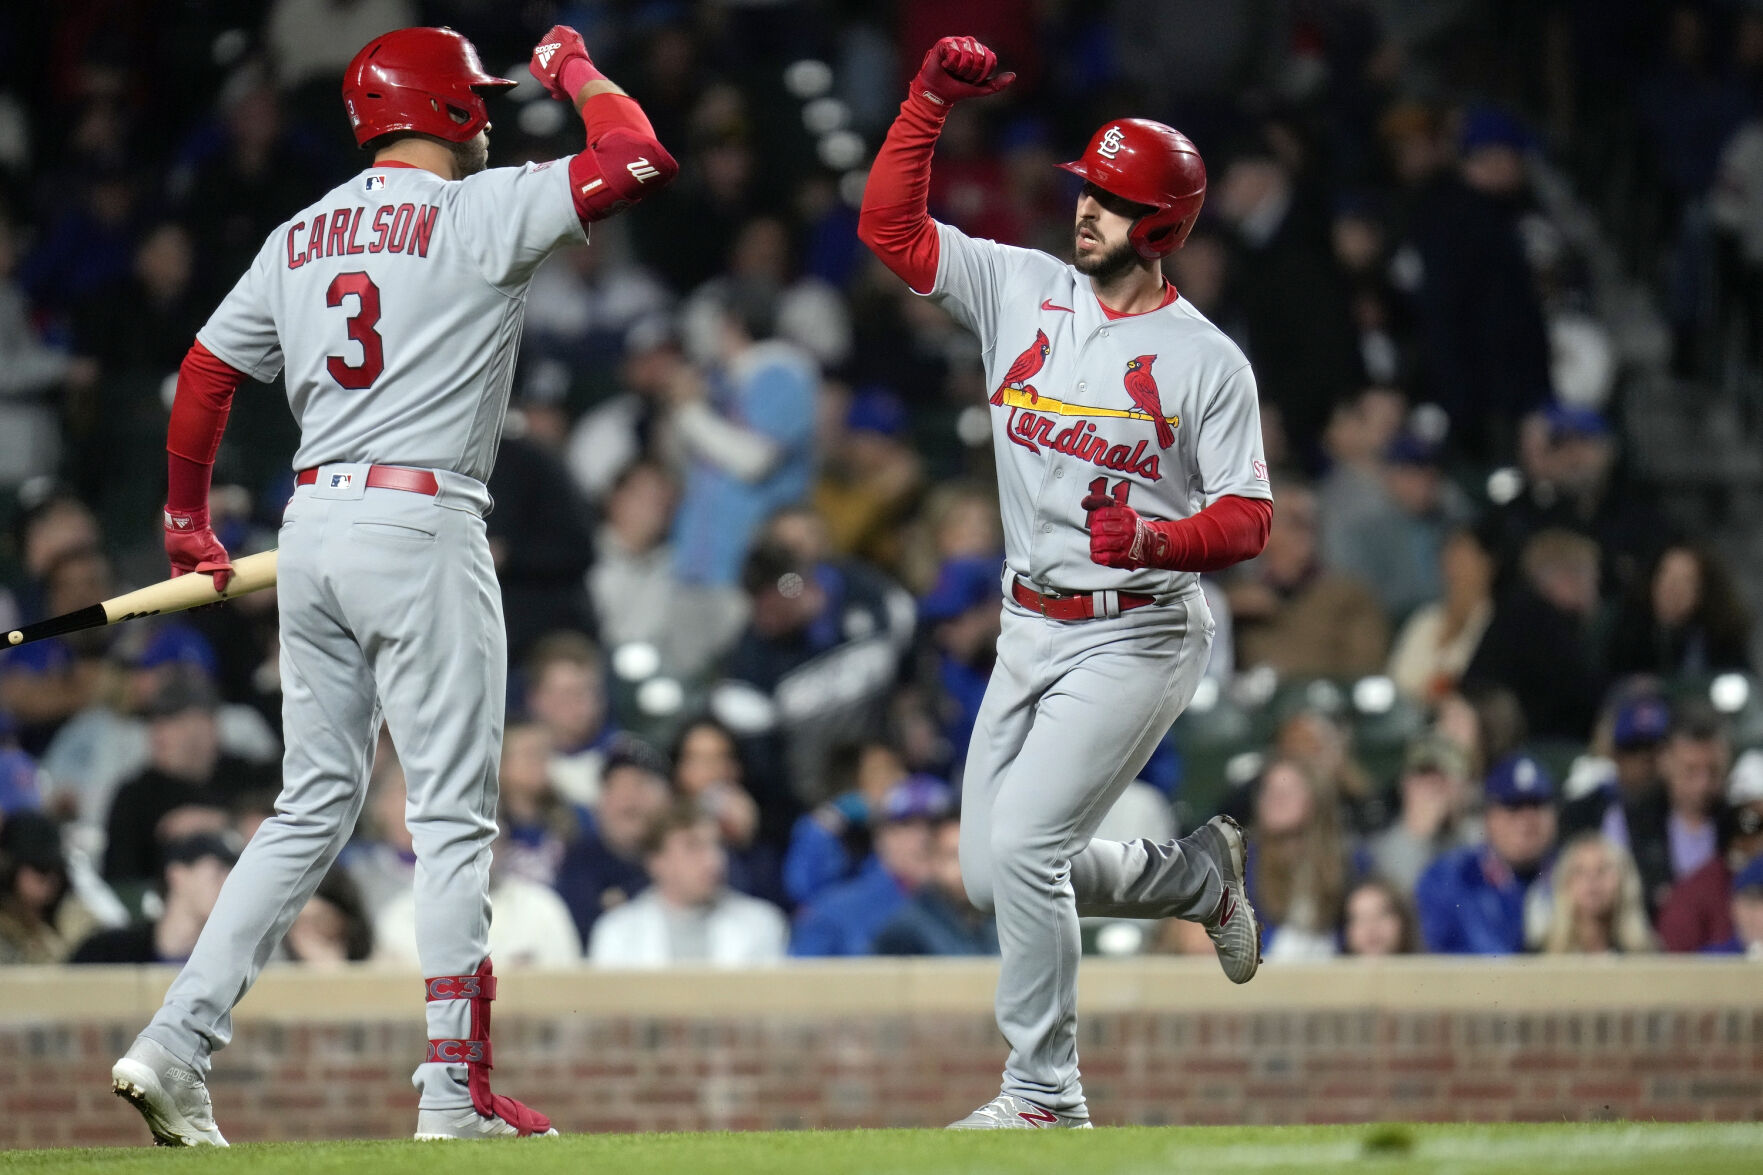 Whats this? A winning streak? Rally in ninth lifts Cardinals over Cubs for third straight Quick Hits